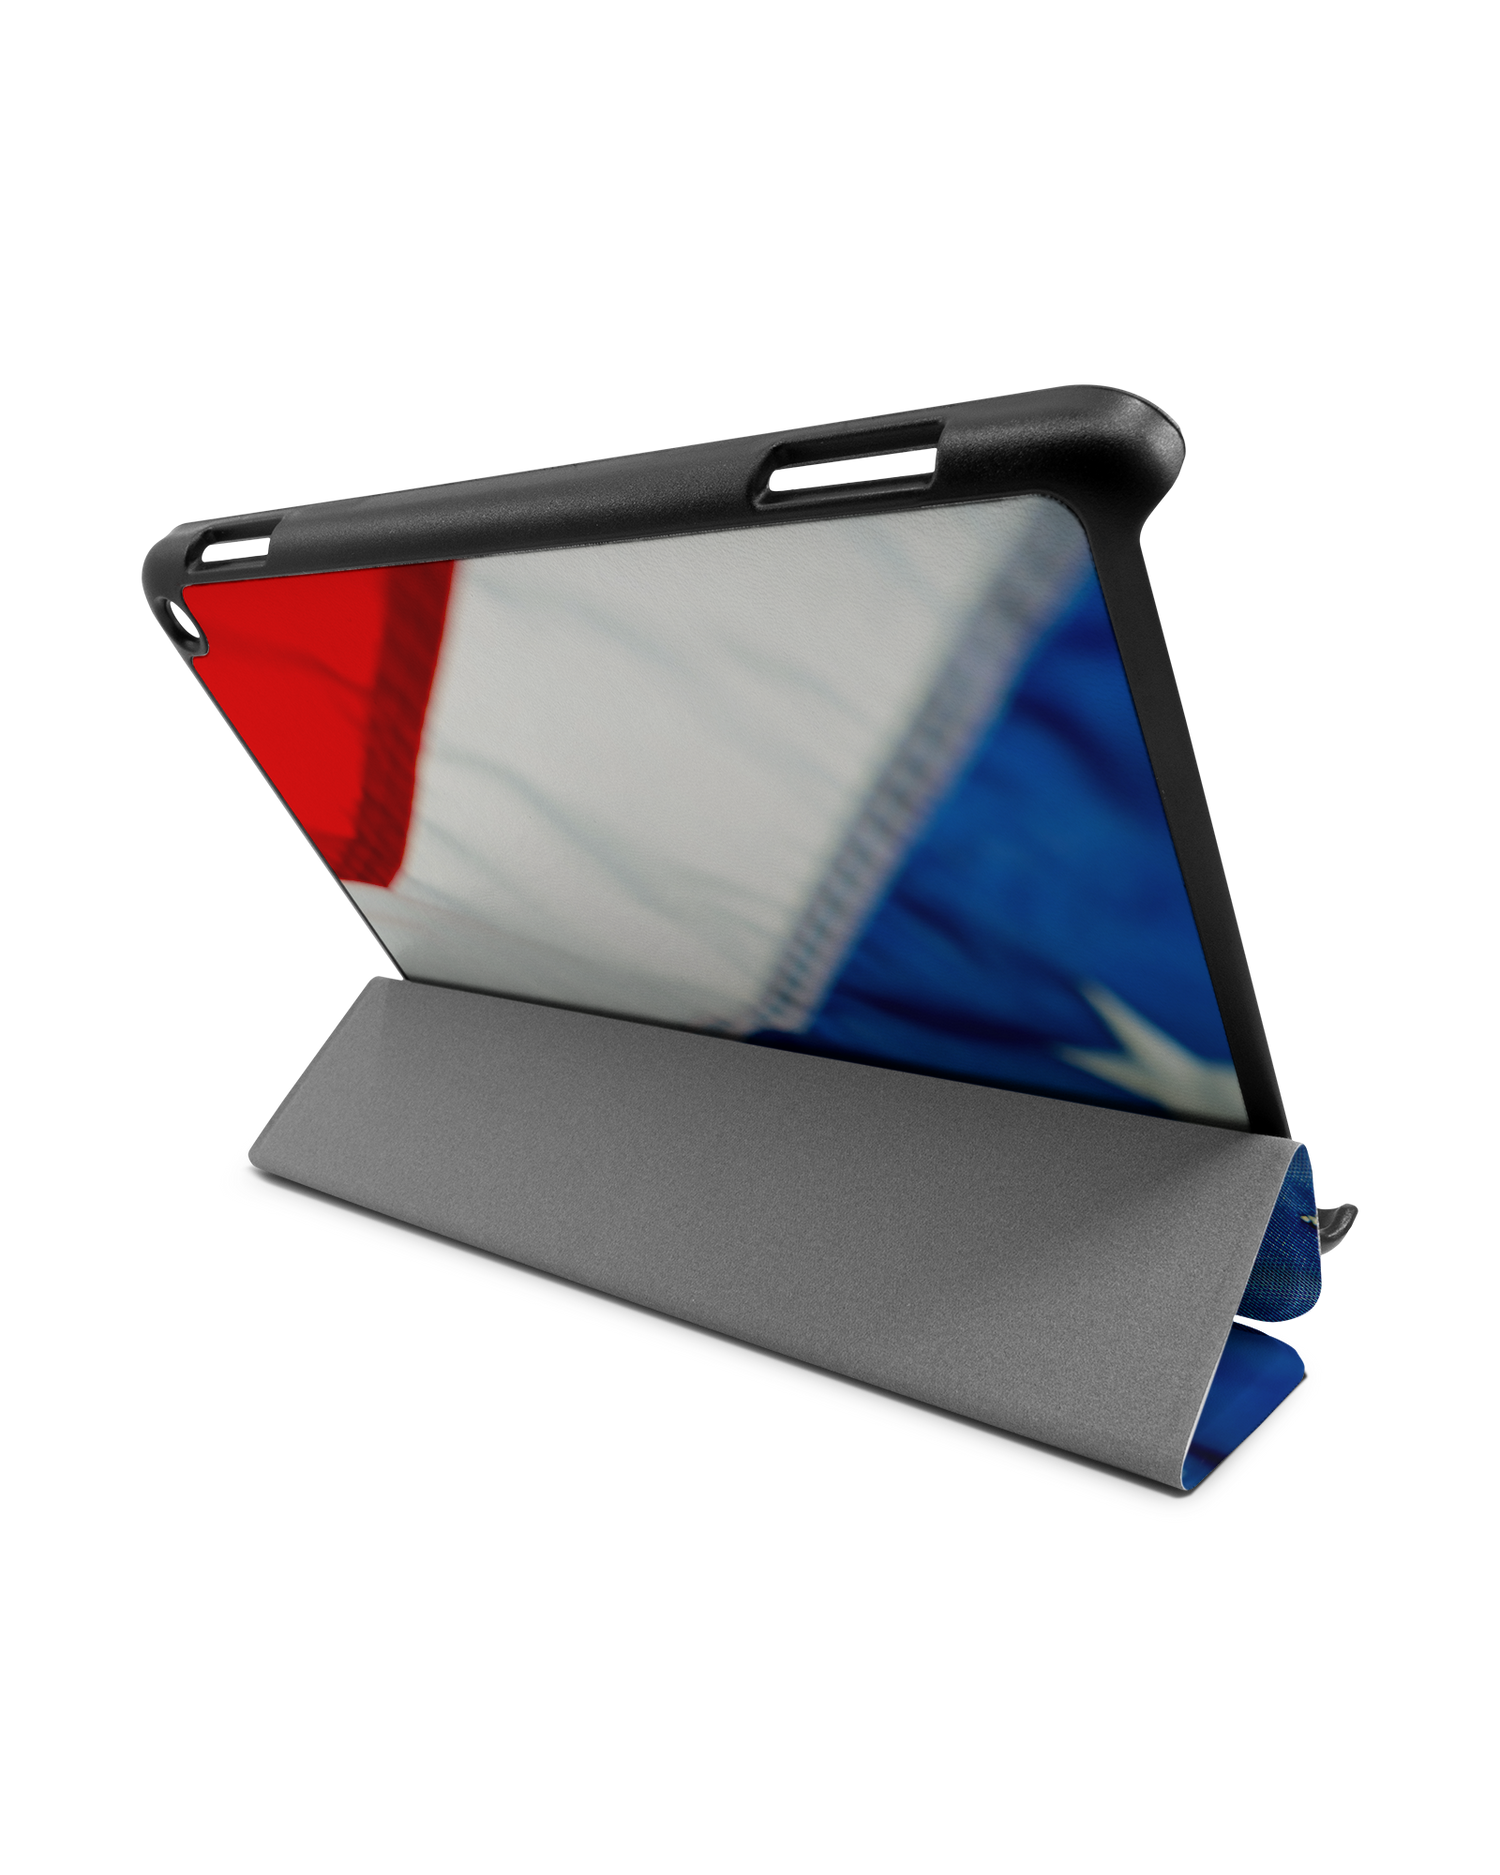 Stars And Stripes Tablet Smart Case for Amazon Fire HD 8 (2022), Amazon Fire HD 8 Plus (2022), Amazon Fire HD 8 (2020), Amazon Fire HD 8 Plus (2020): Used as Stand